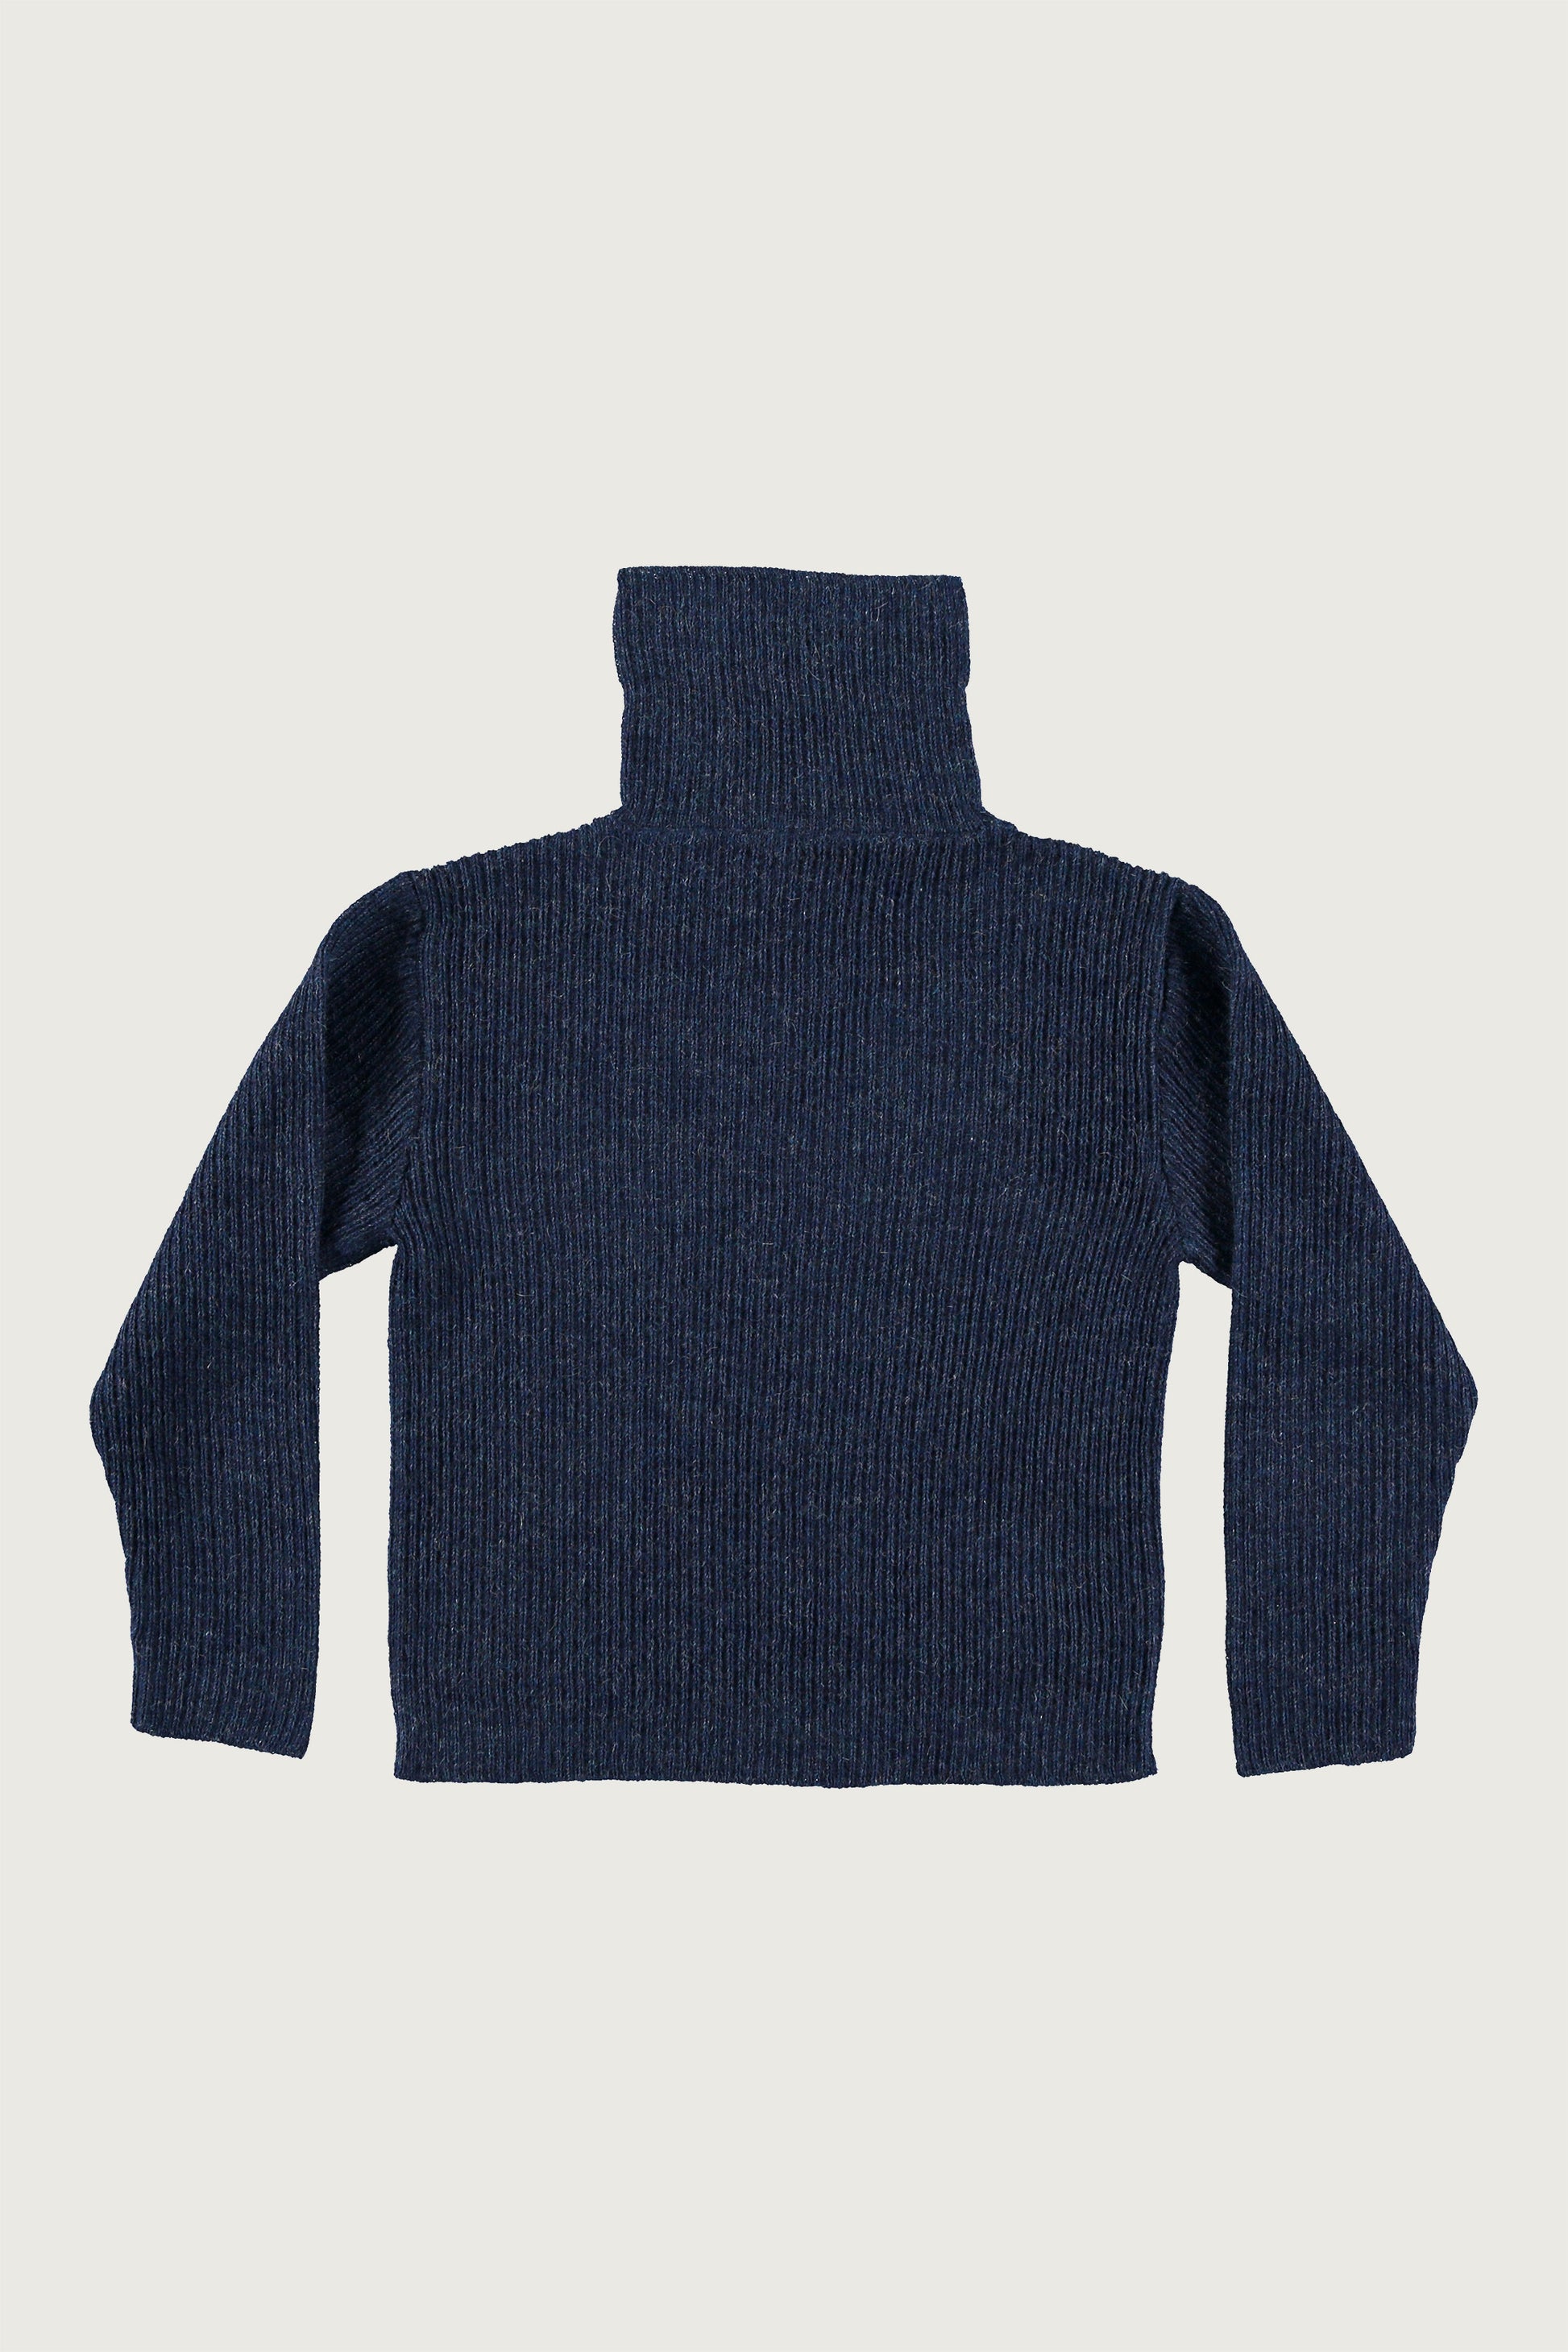 Coco Au Lait BLUE NIGHTS KNITTED TURTTLE NECK JUMPER  Blue Nights